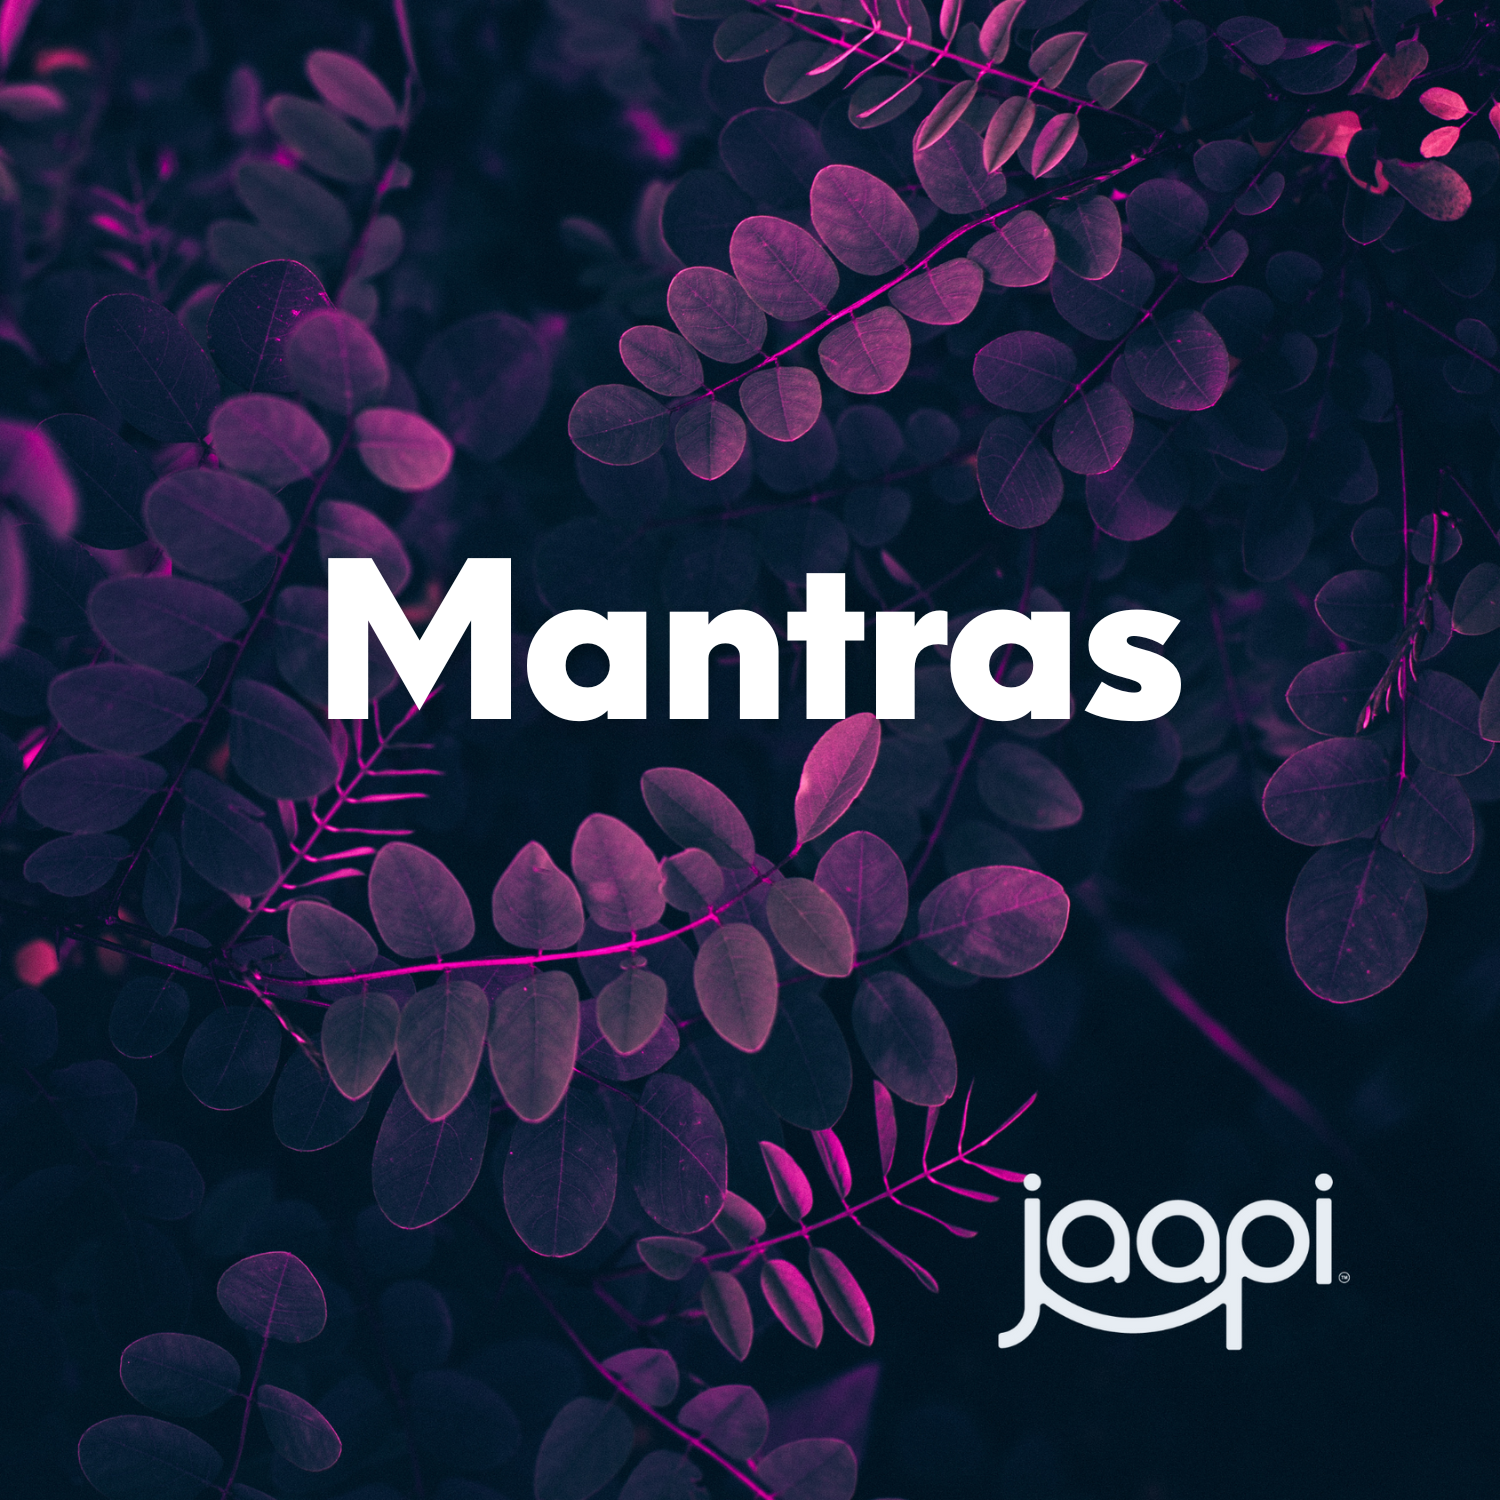 Mantras: High vibrational chants and mantras that connect mind, body, and soul. Curated by Jaapi Media.